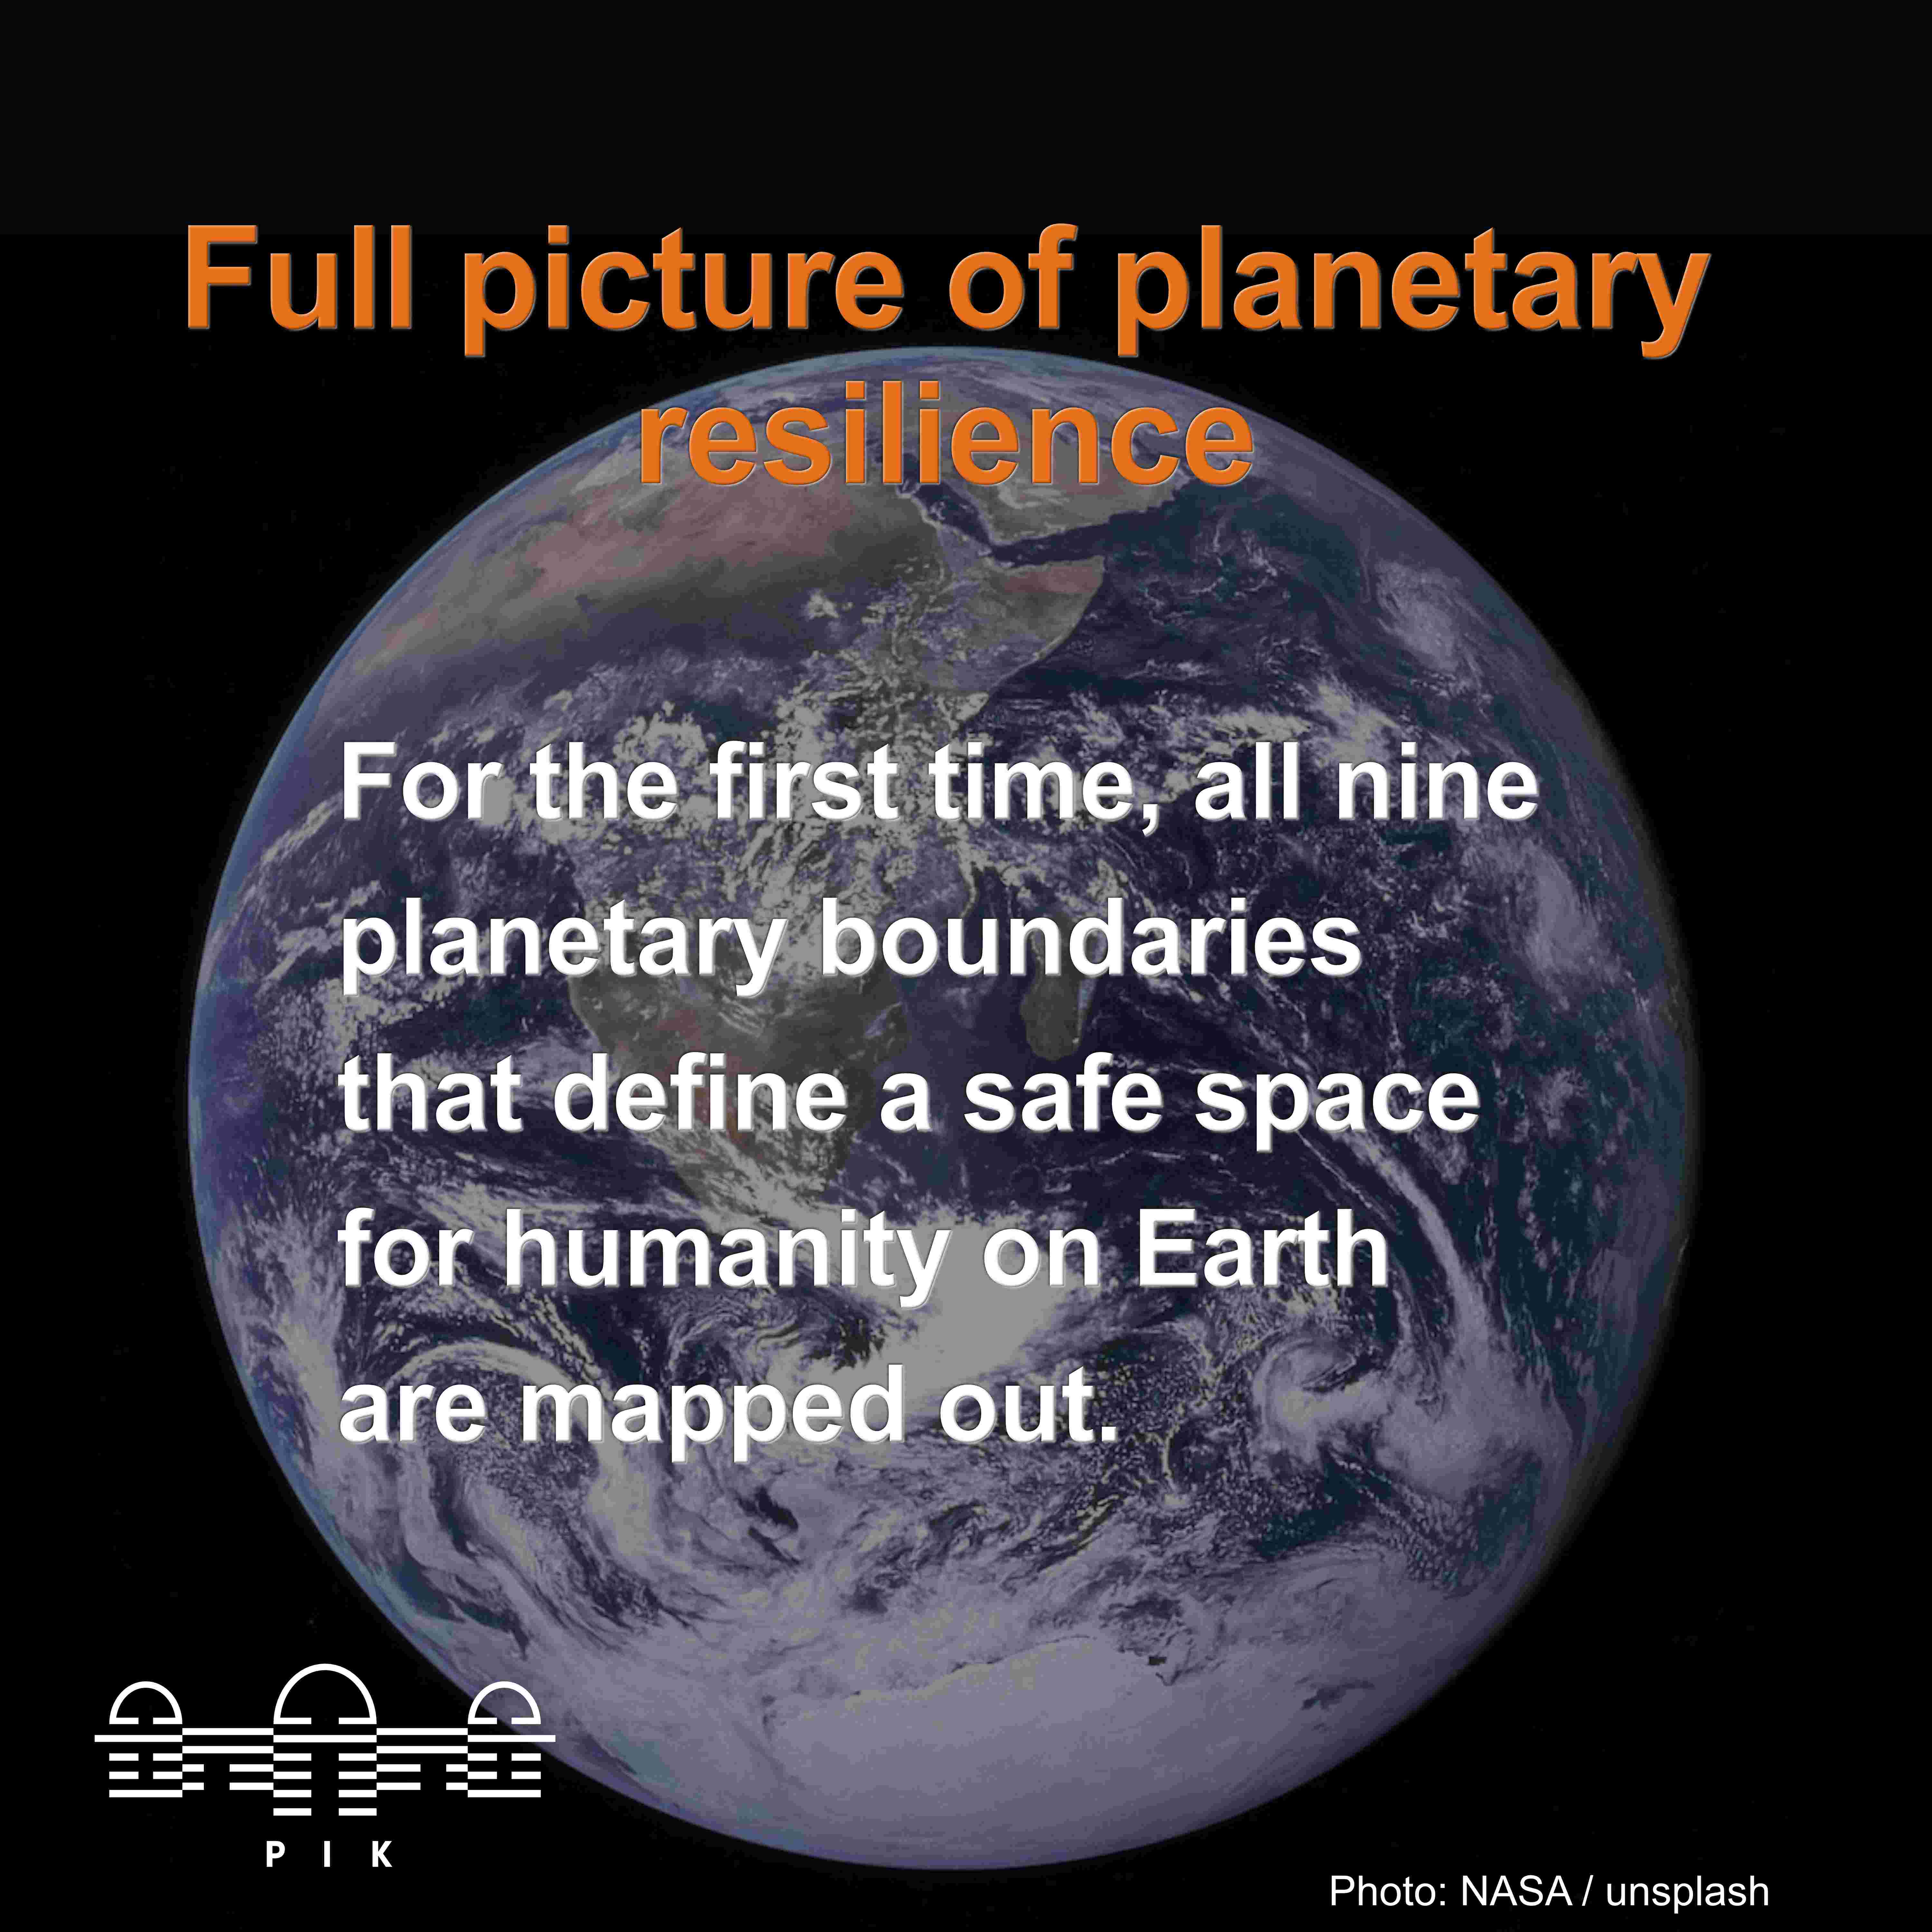 Full picture of planetary resilience